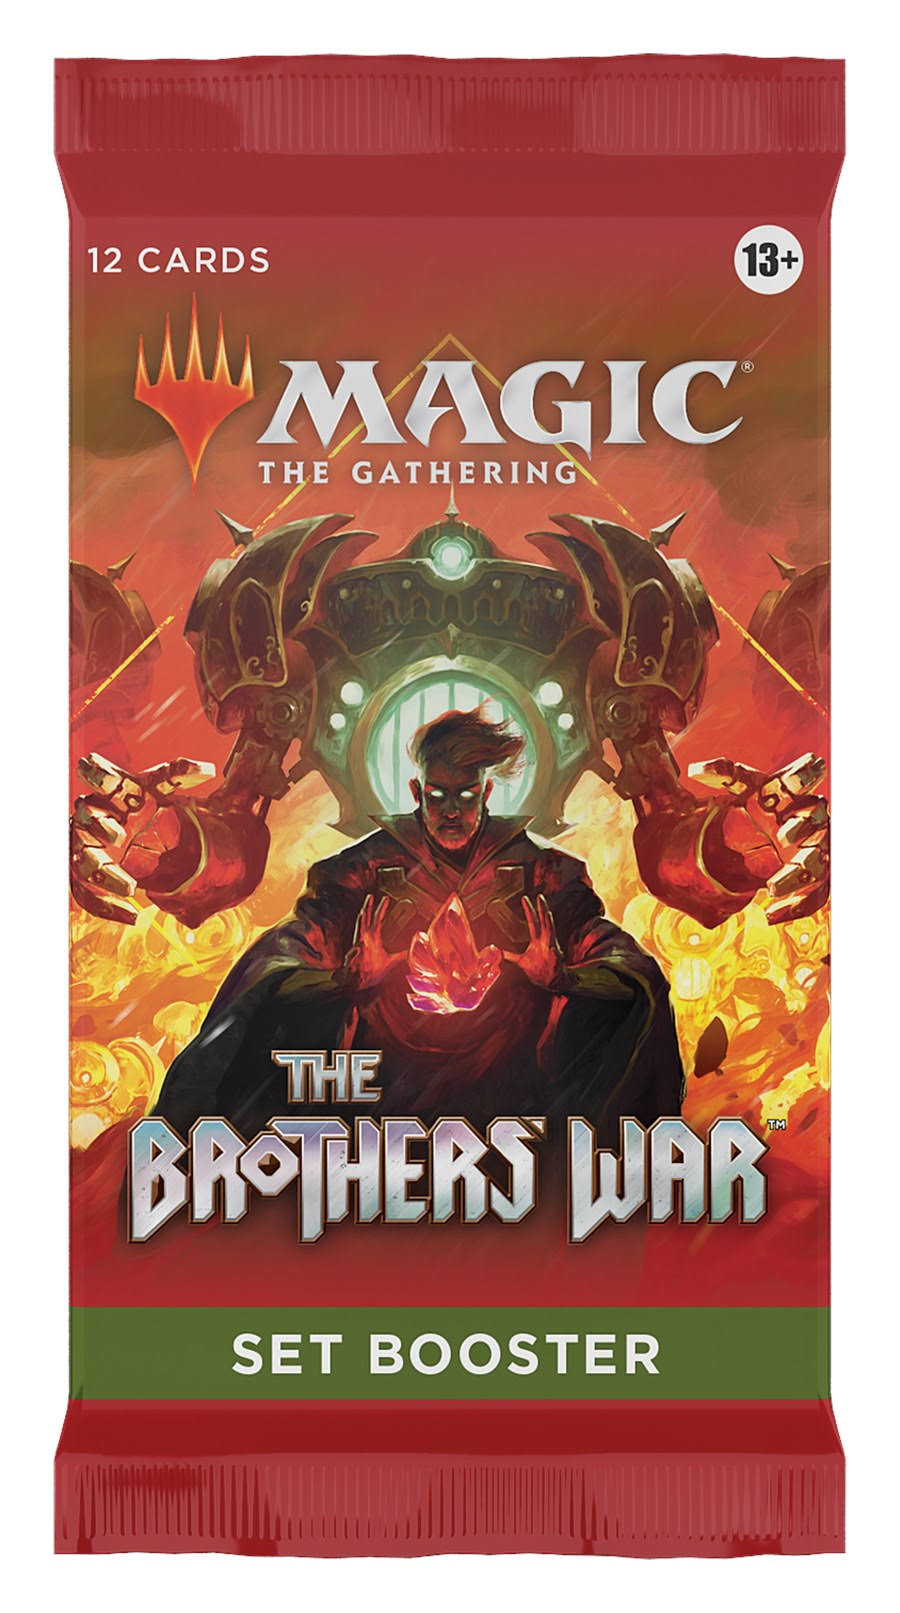 Magic: The Gathering - The Brothers War - Set Booster Pack